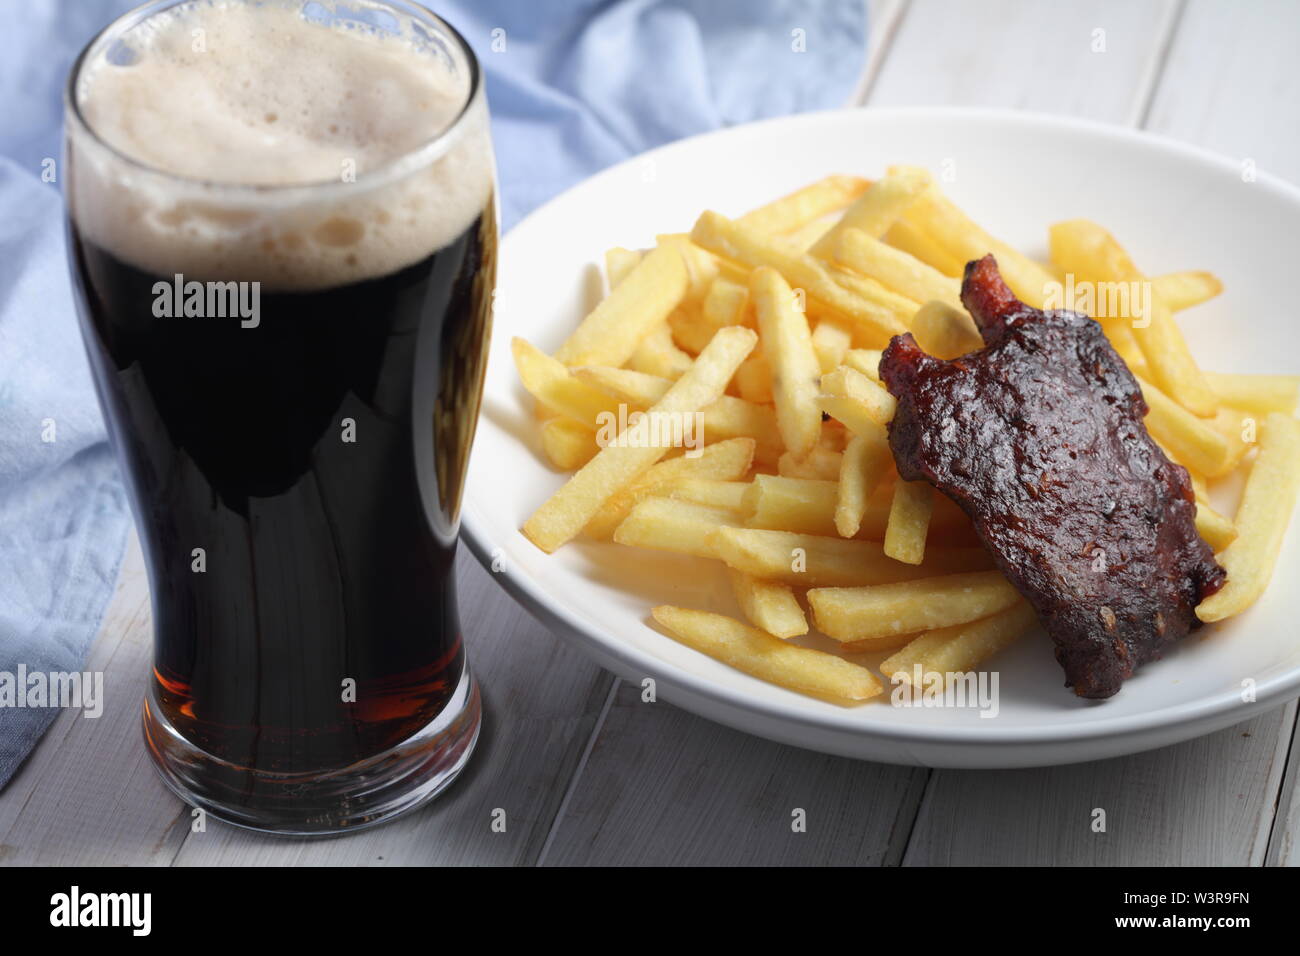 Grilled pork ribs with French fries and a glass of dark beer Stock Photo